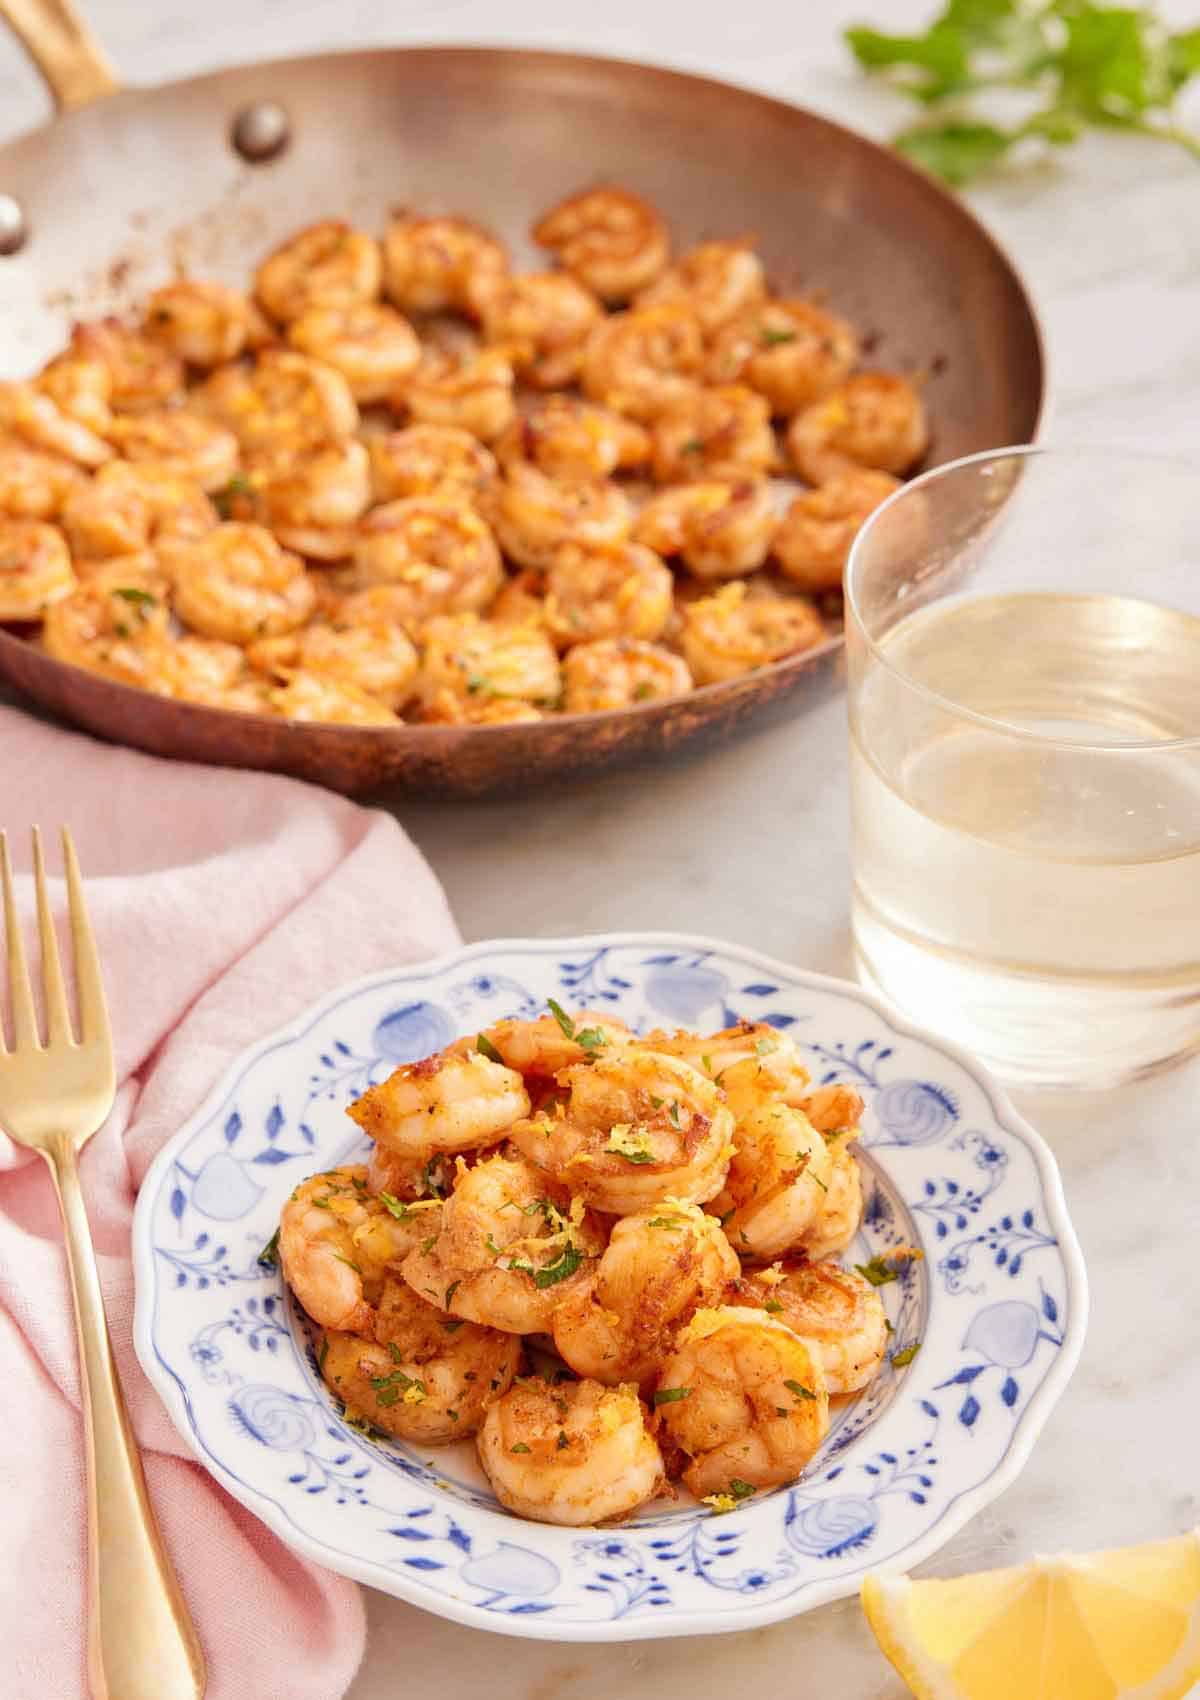 A plate of sautéed shrimp with a glass of wine and skillet of shrimp in the back.